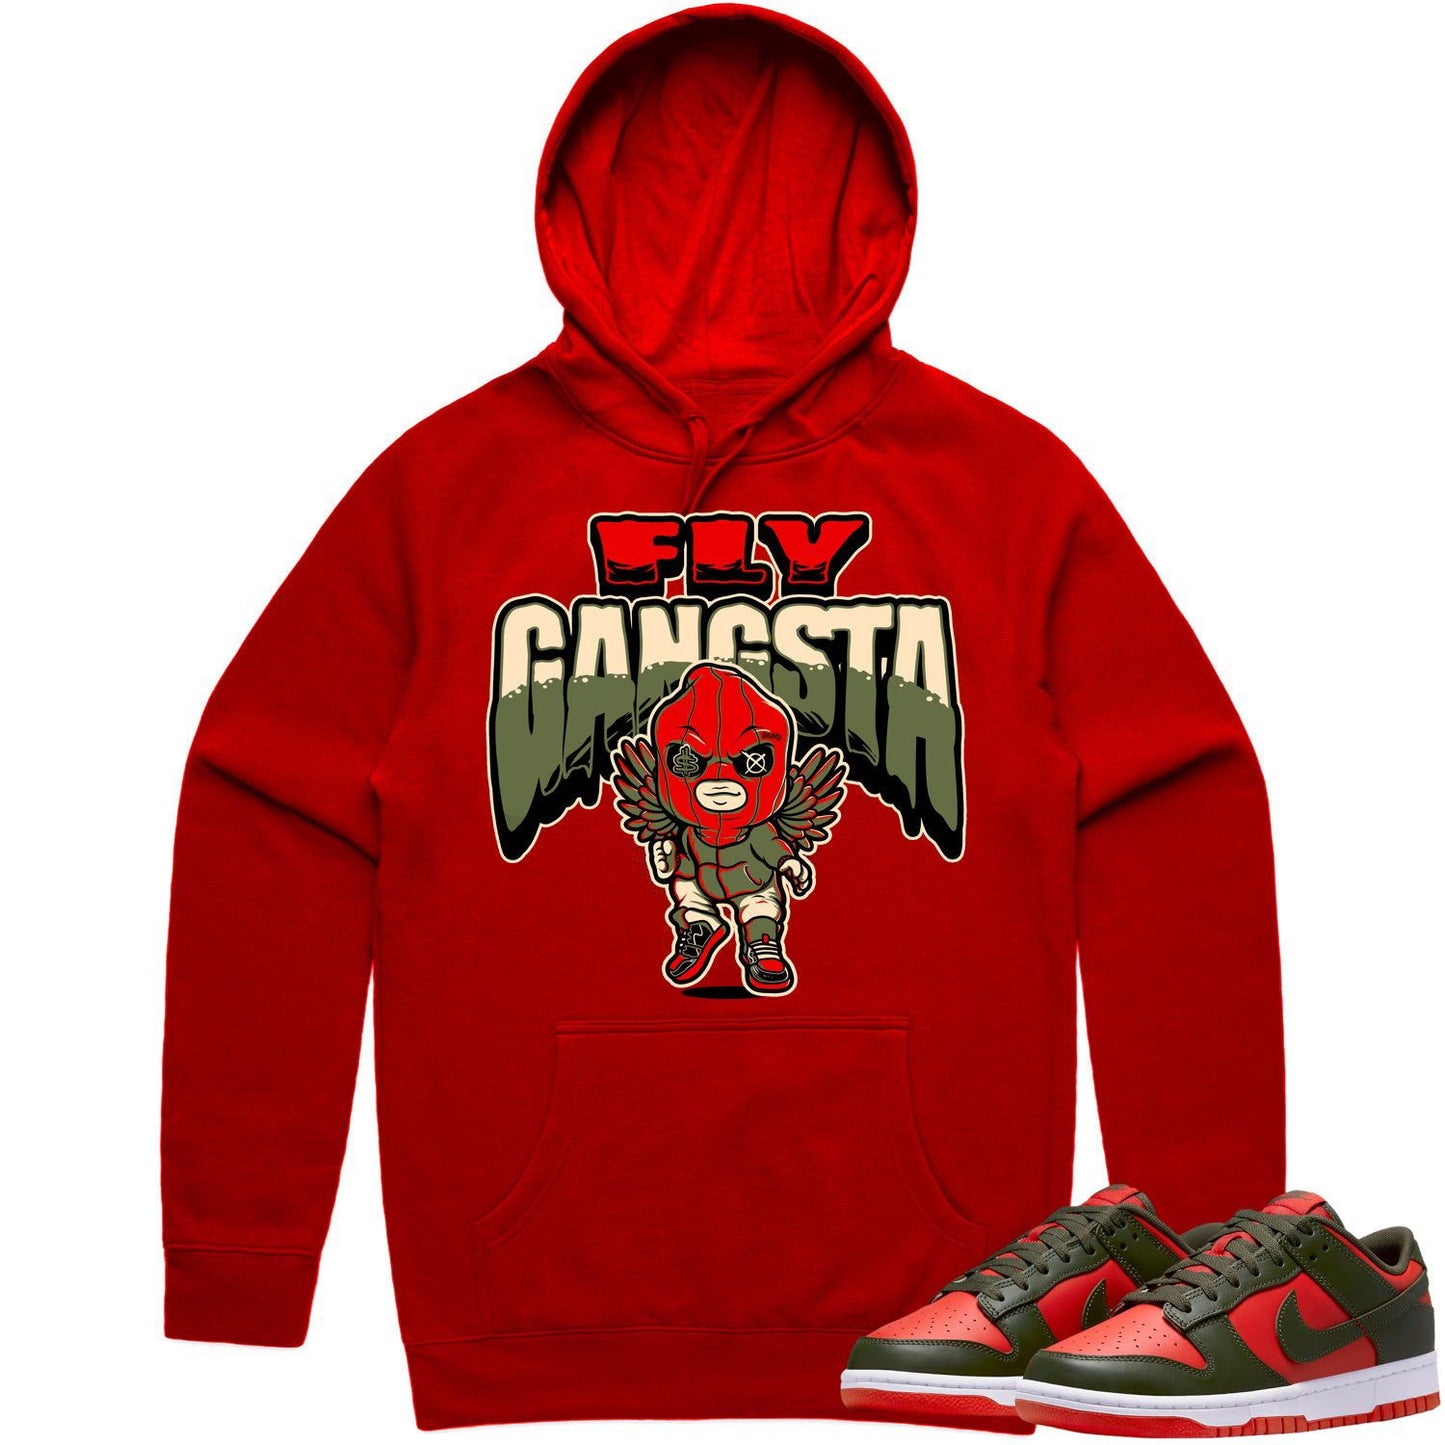 Mystic Red Dunks Hoodie - Olive Red Dunks Shirts - Olive Fly Gangsta